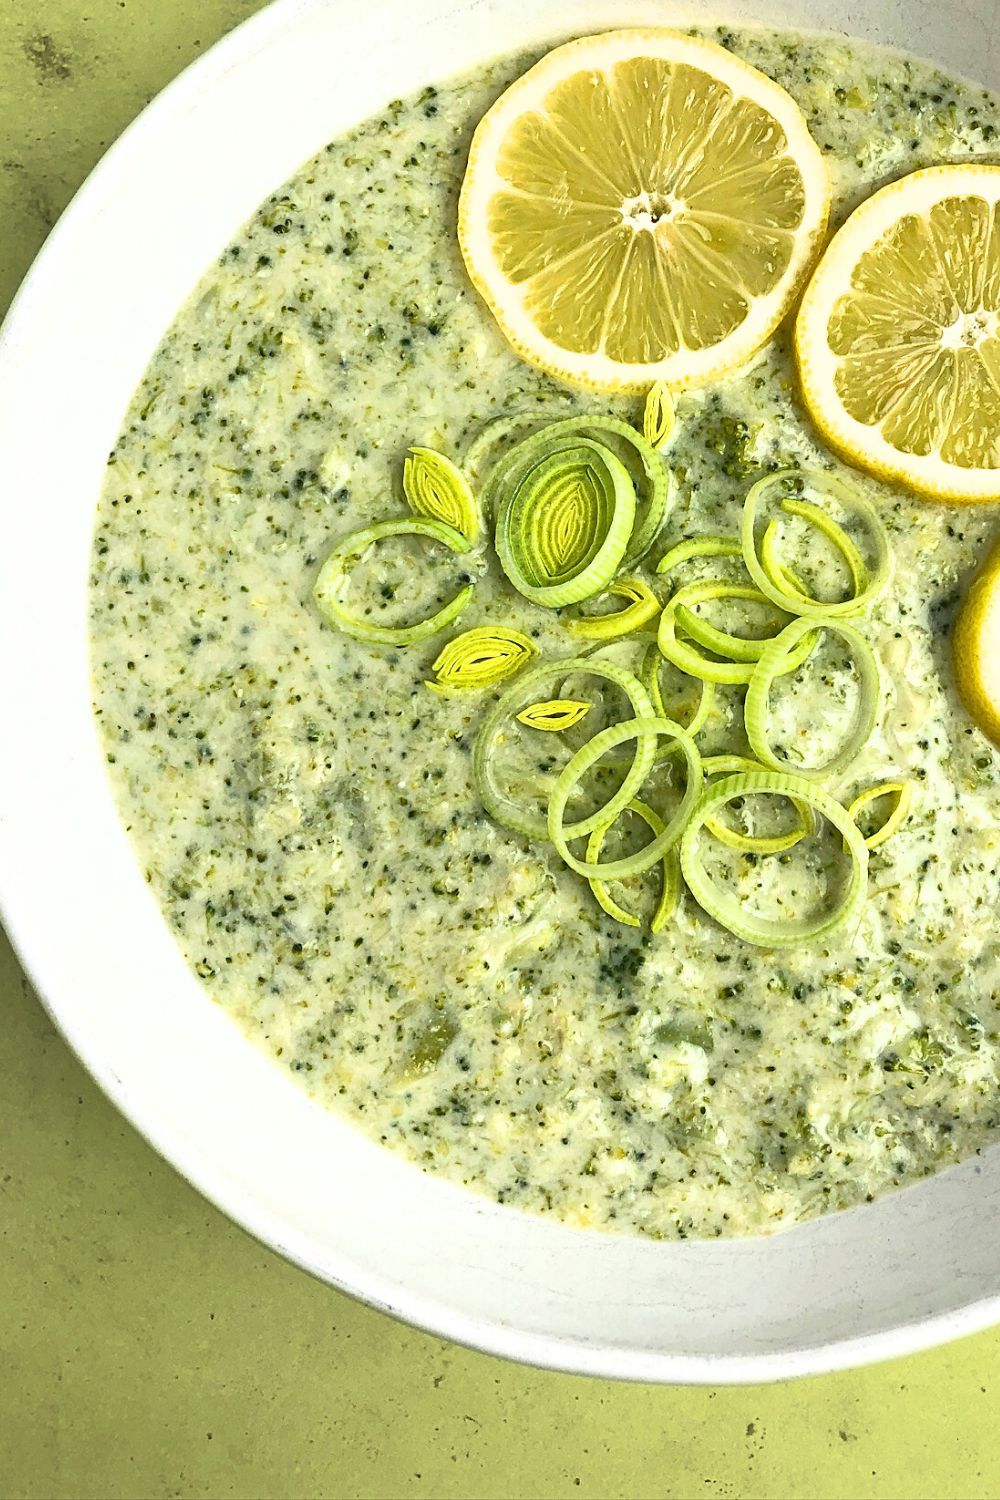 Top-down view of Lemony Leek and Broccoli Soup, showing a close-up view of the soup, garnished with lemons and thinly sliced leeks